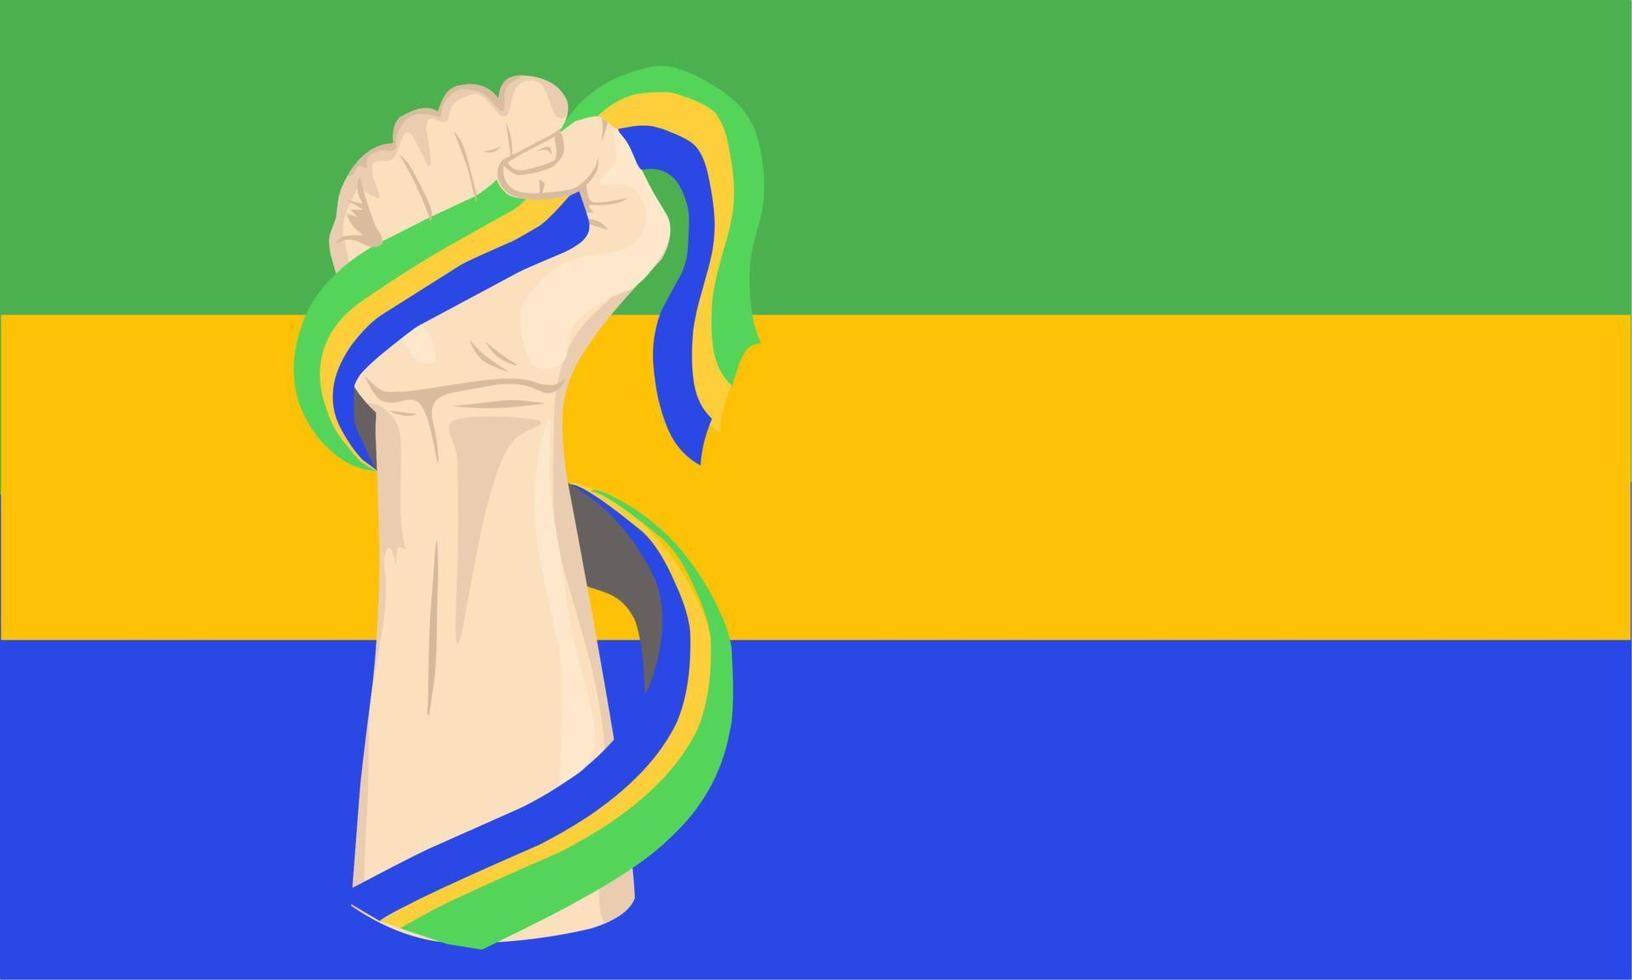 Illustration vector graphic of Gabon independence day with hand holding the gabon flag. Perfect for independence day celebrations. Banner design